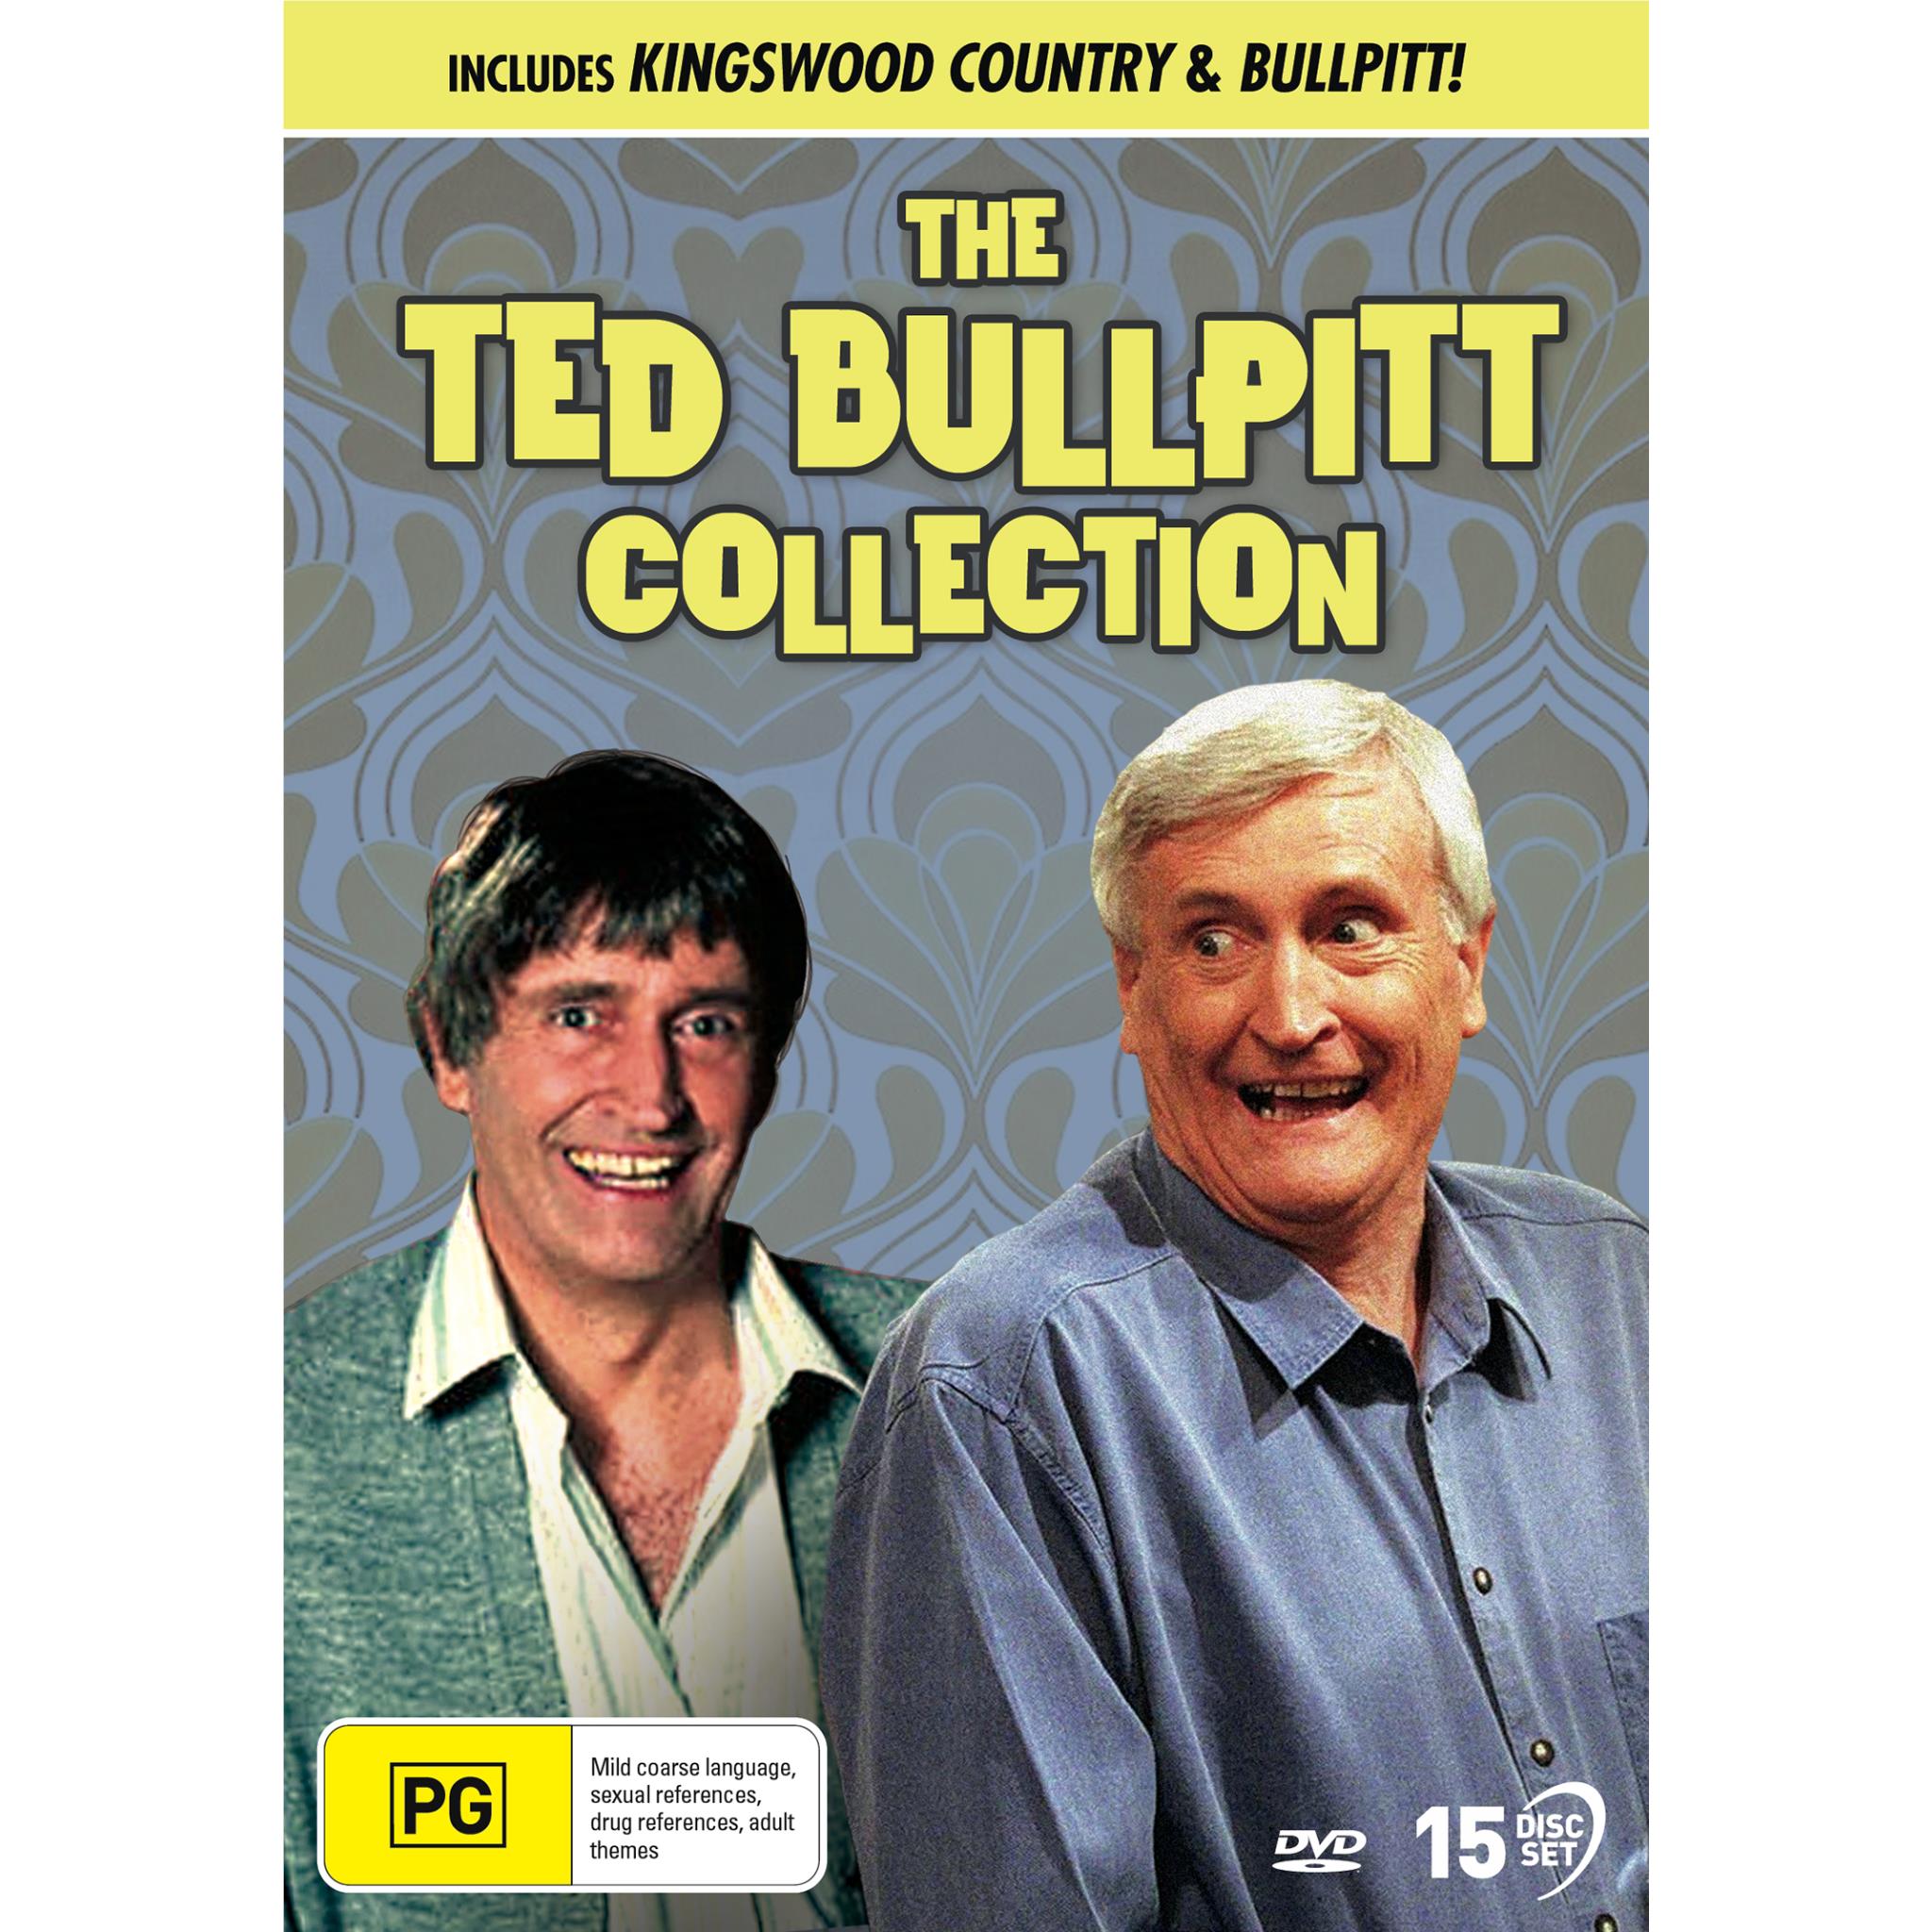 ted bullpitt collection, the: kingswood country / bullpitt!